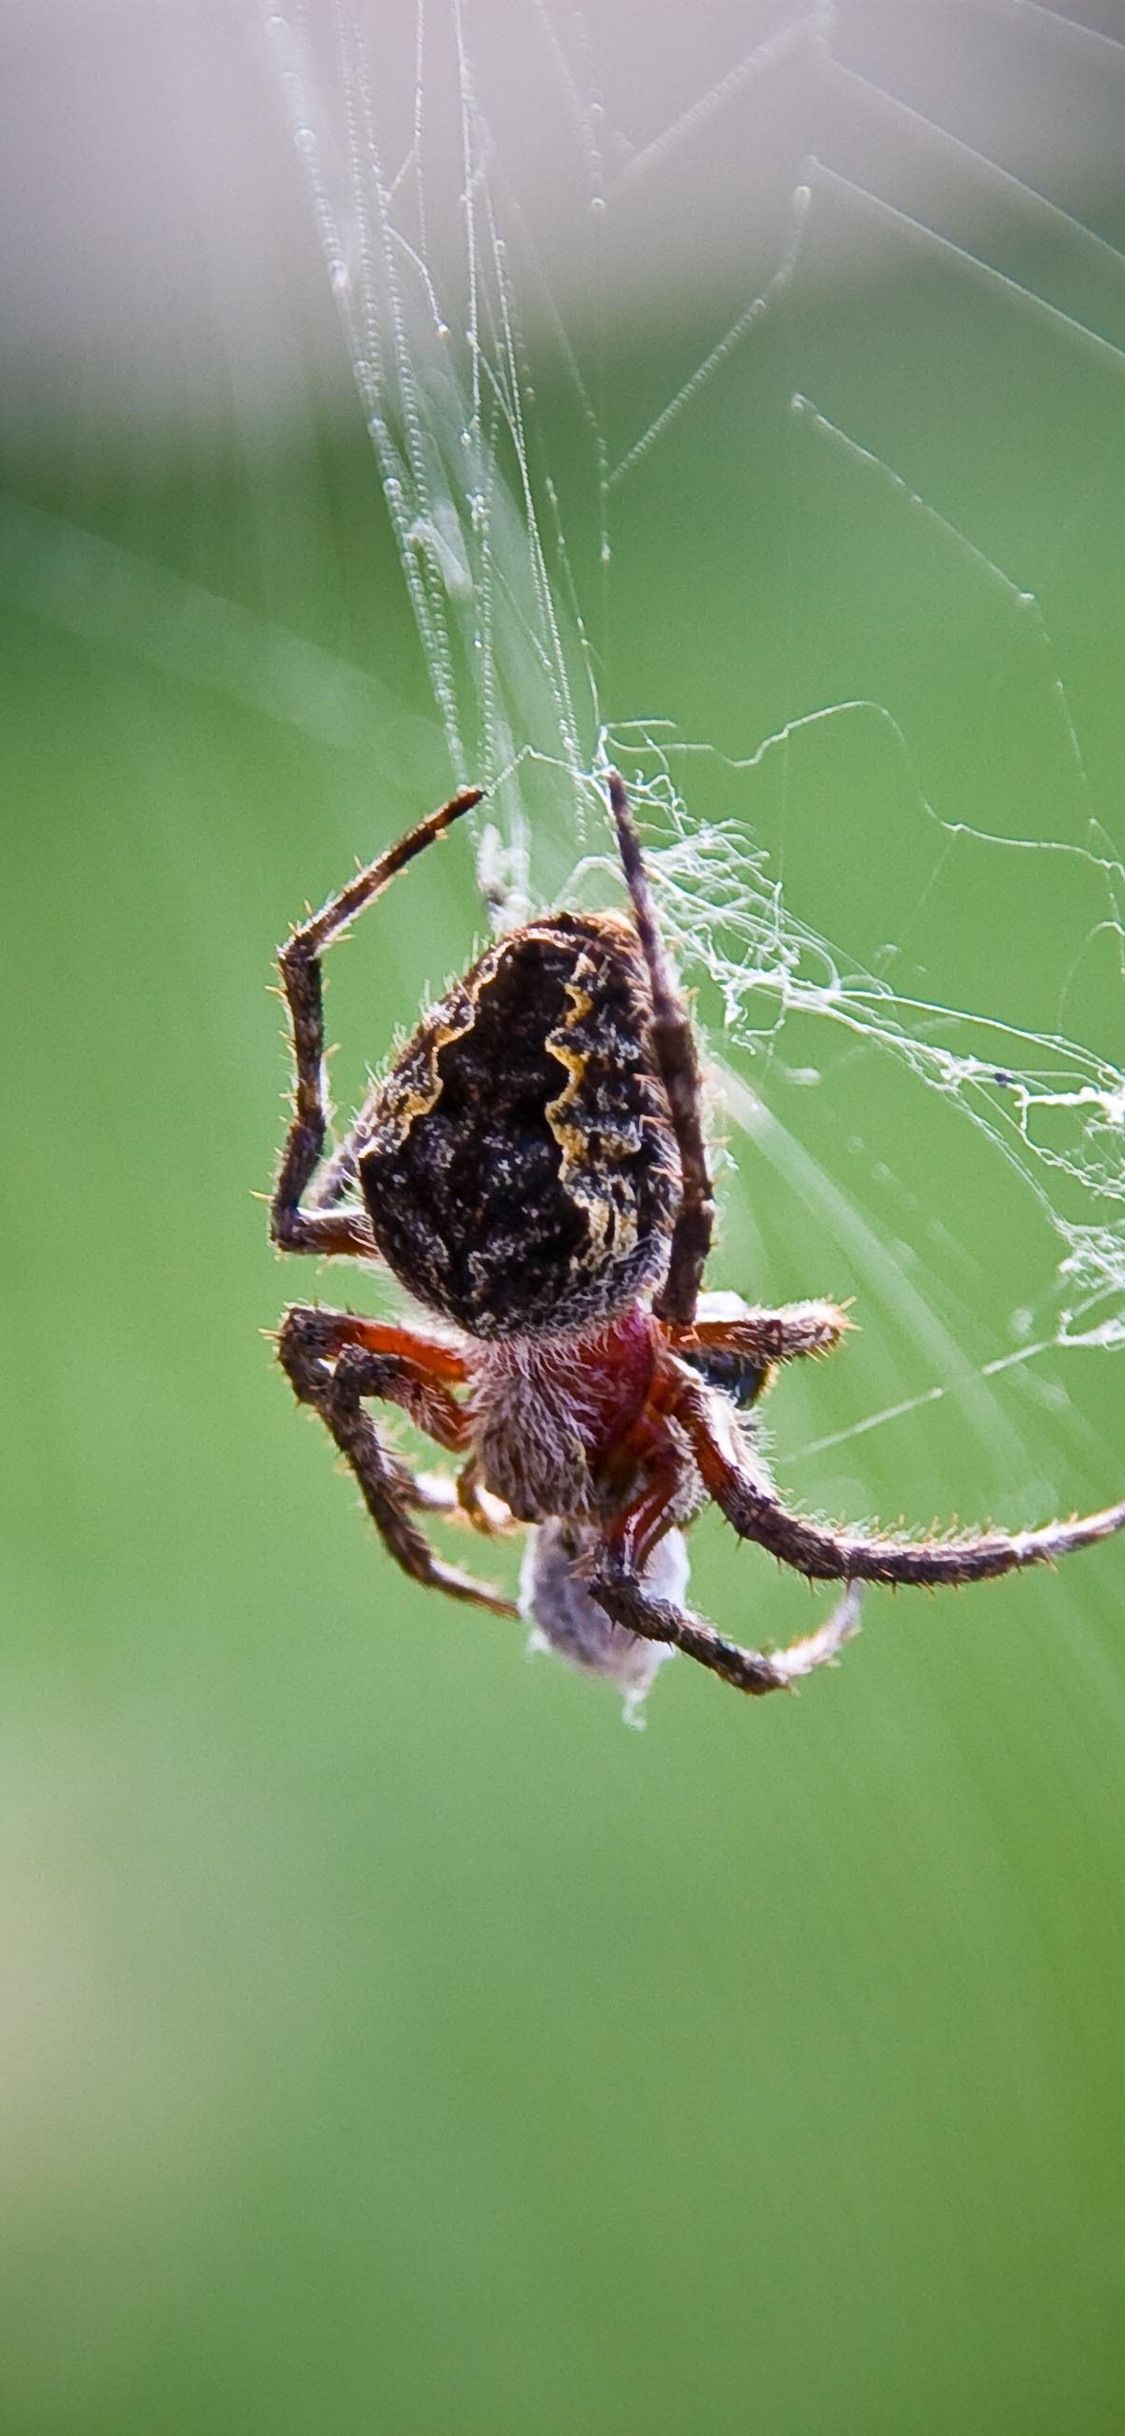 Wallpaper Spider, insect, web 3840x2160 UHD 4K Picture, Image